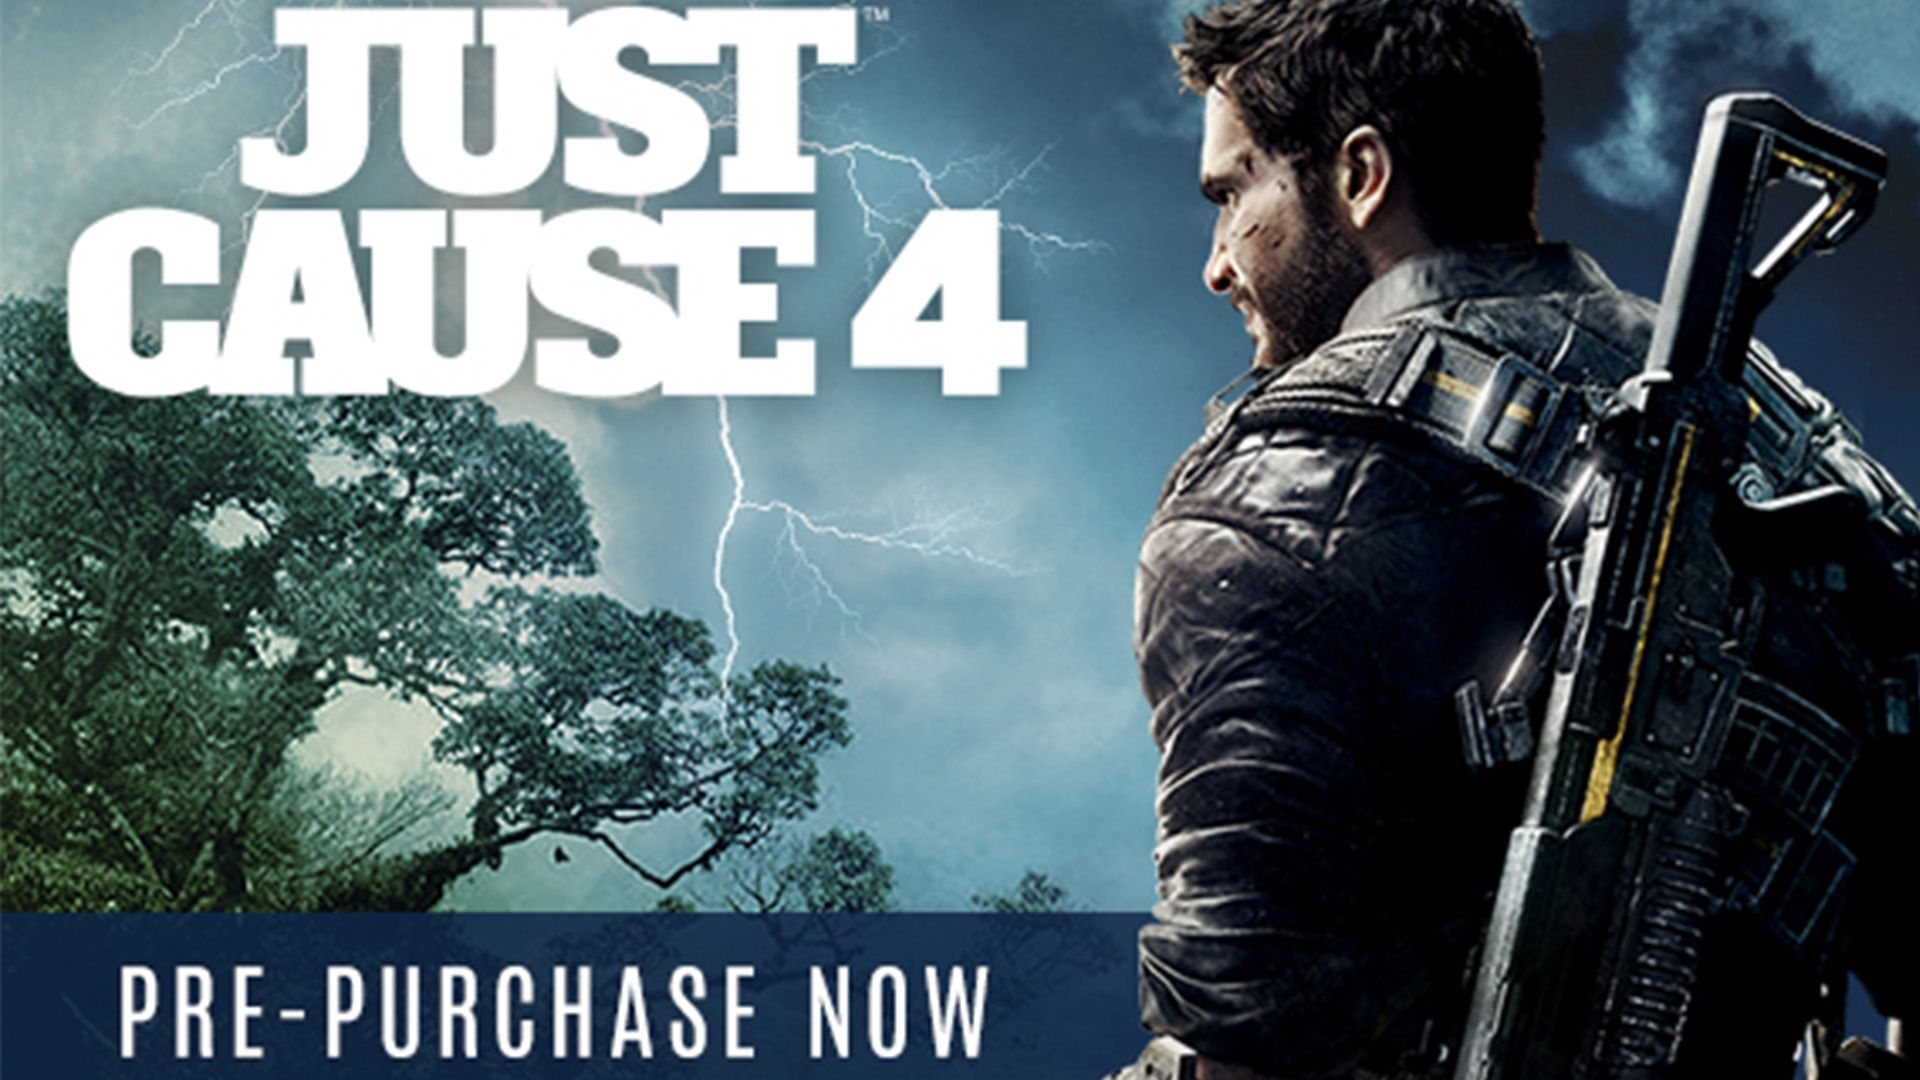 Just cause 4 армия хаоса. Just cause 4. Just cause Кейн. This is just a game